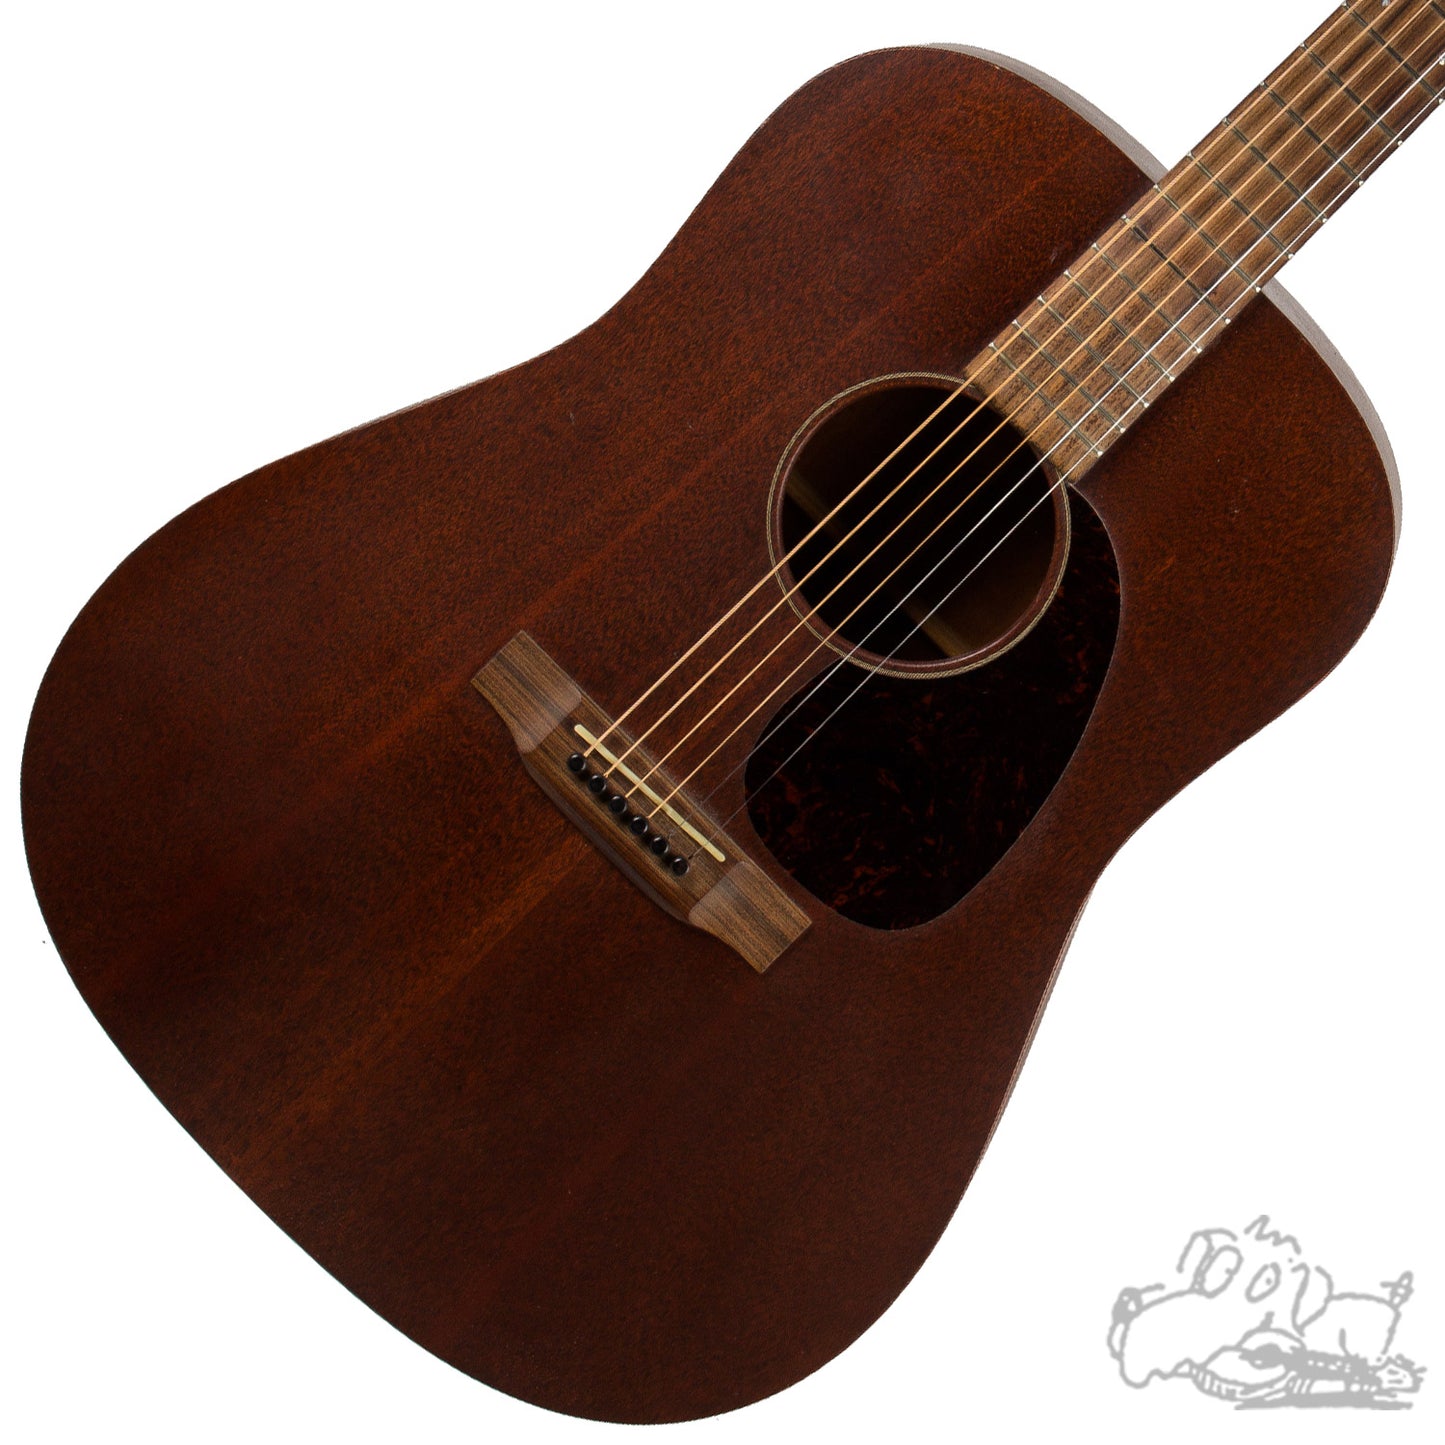 Previously owned 2013 Martin D-15M